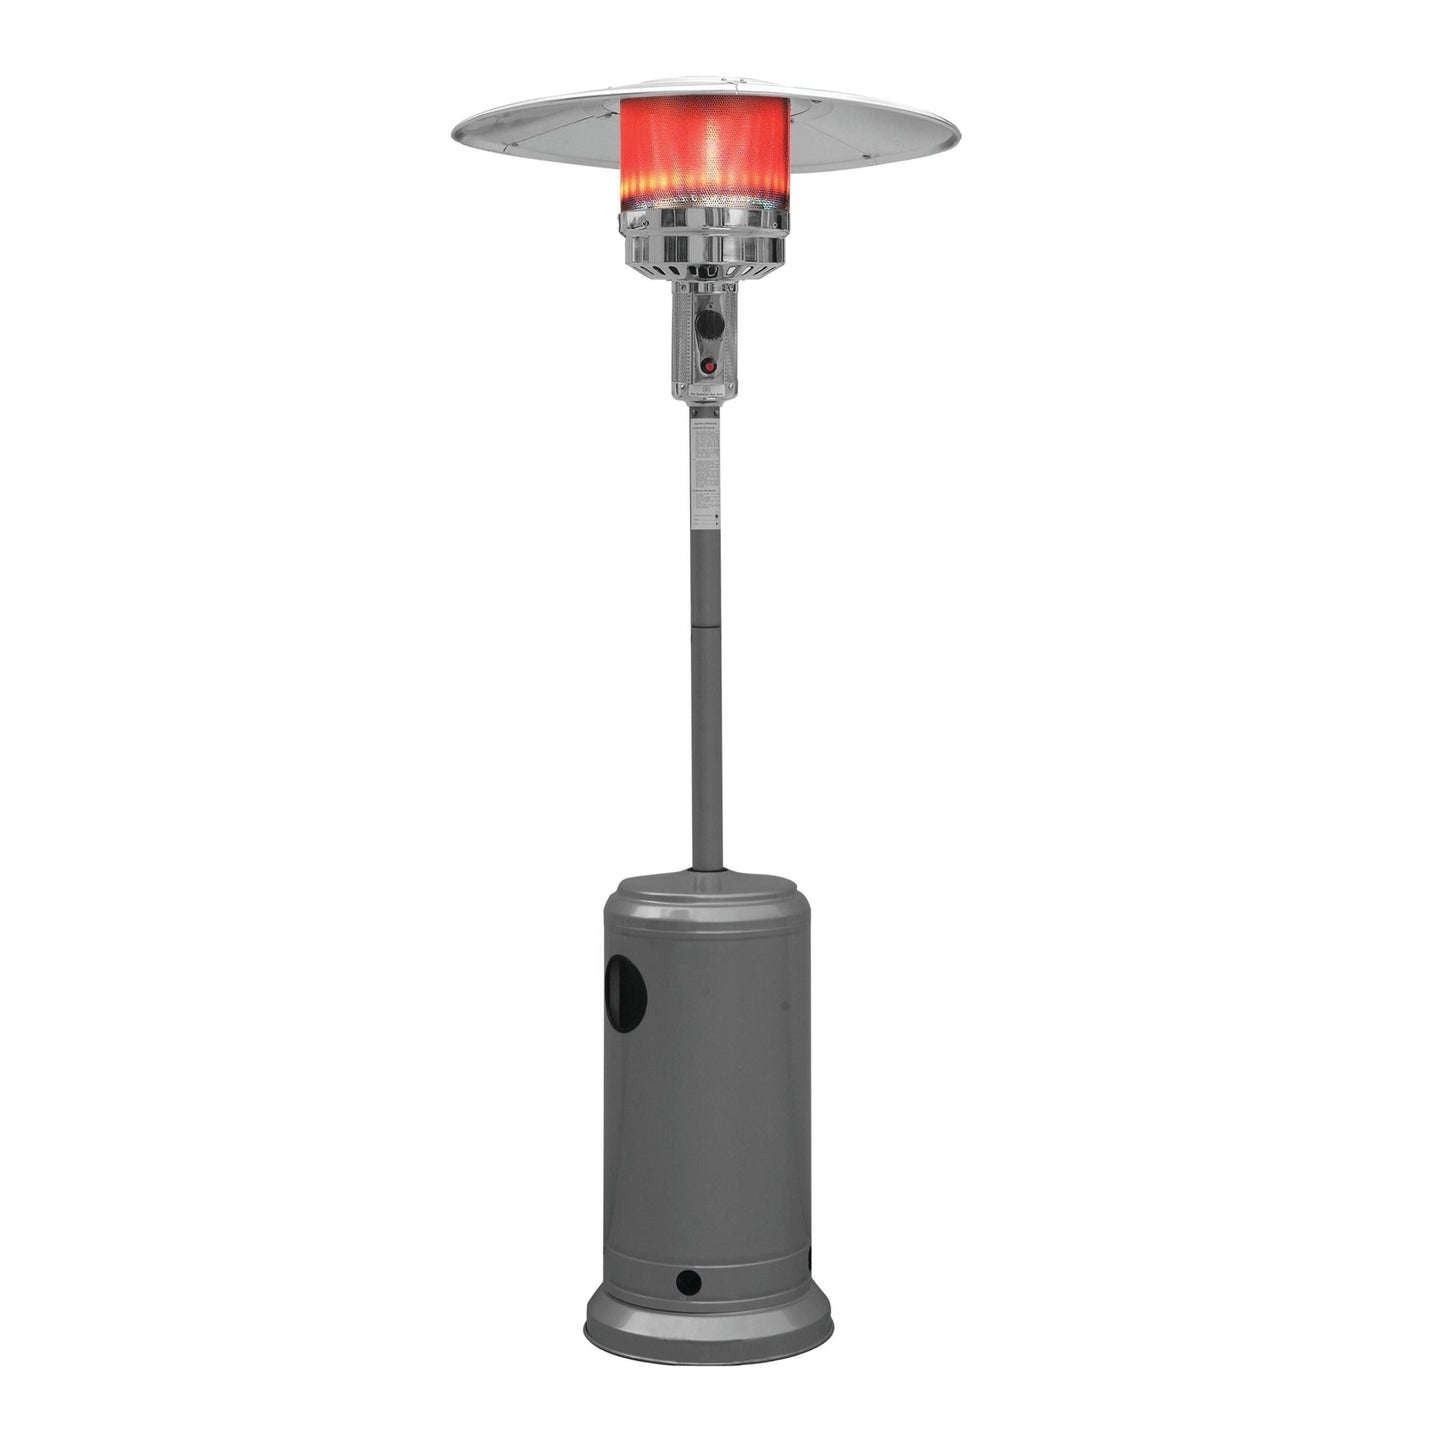 GAS PATIO HEATER - POWDER COATED WITH SEGMENTED POLE